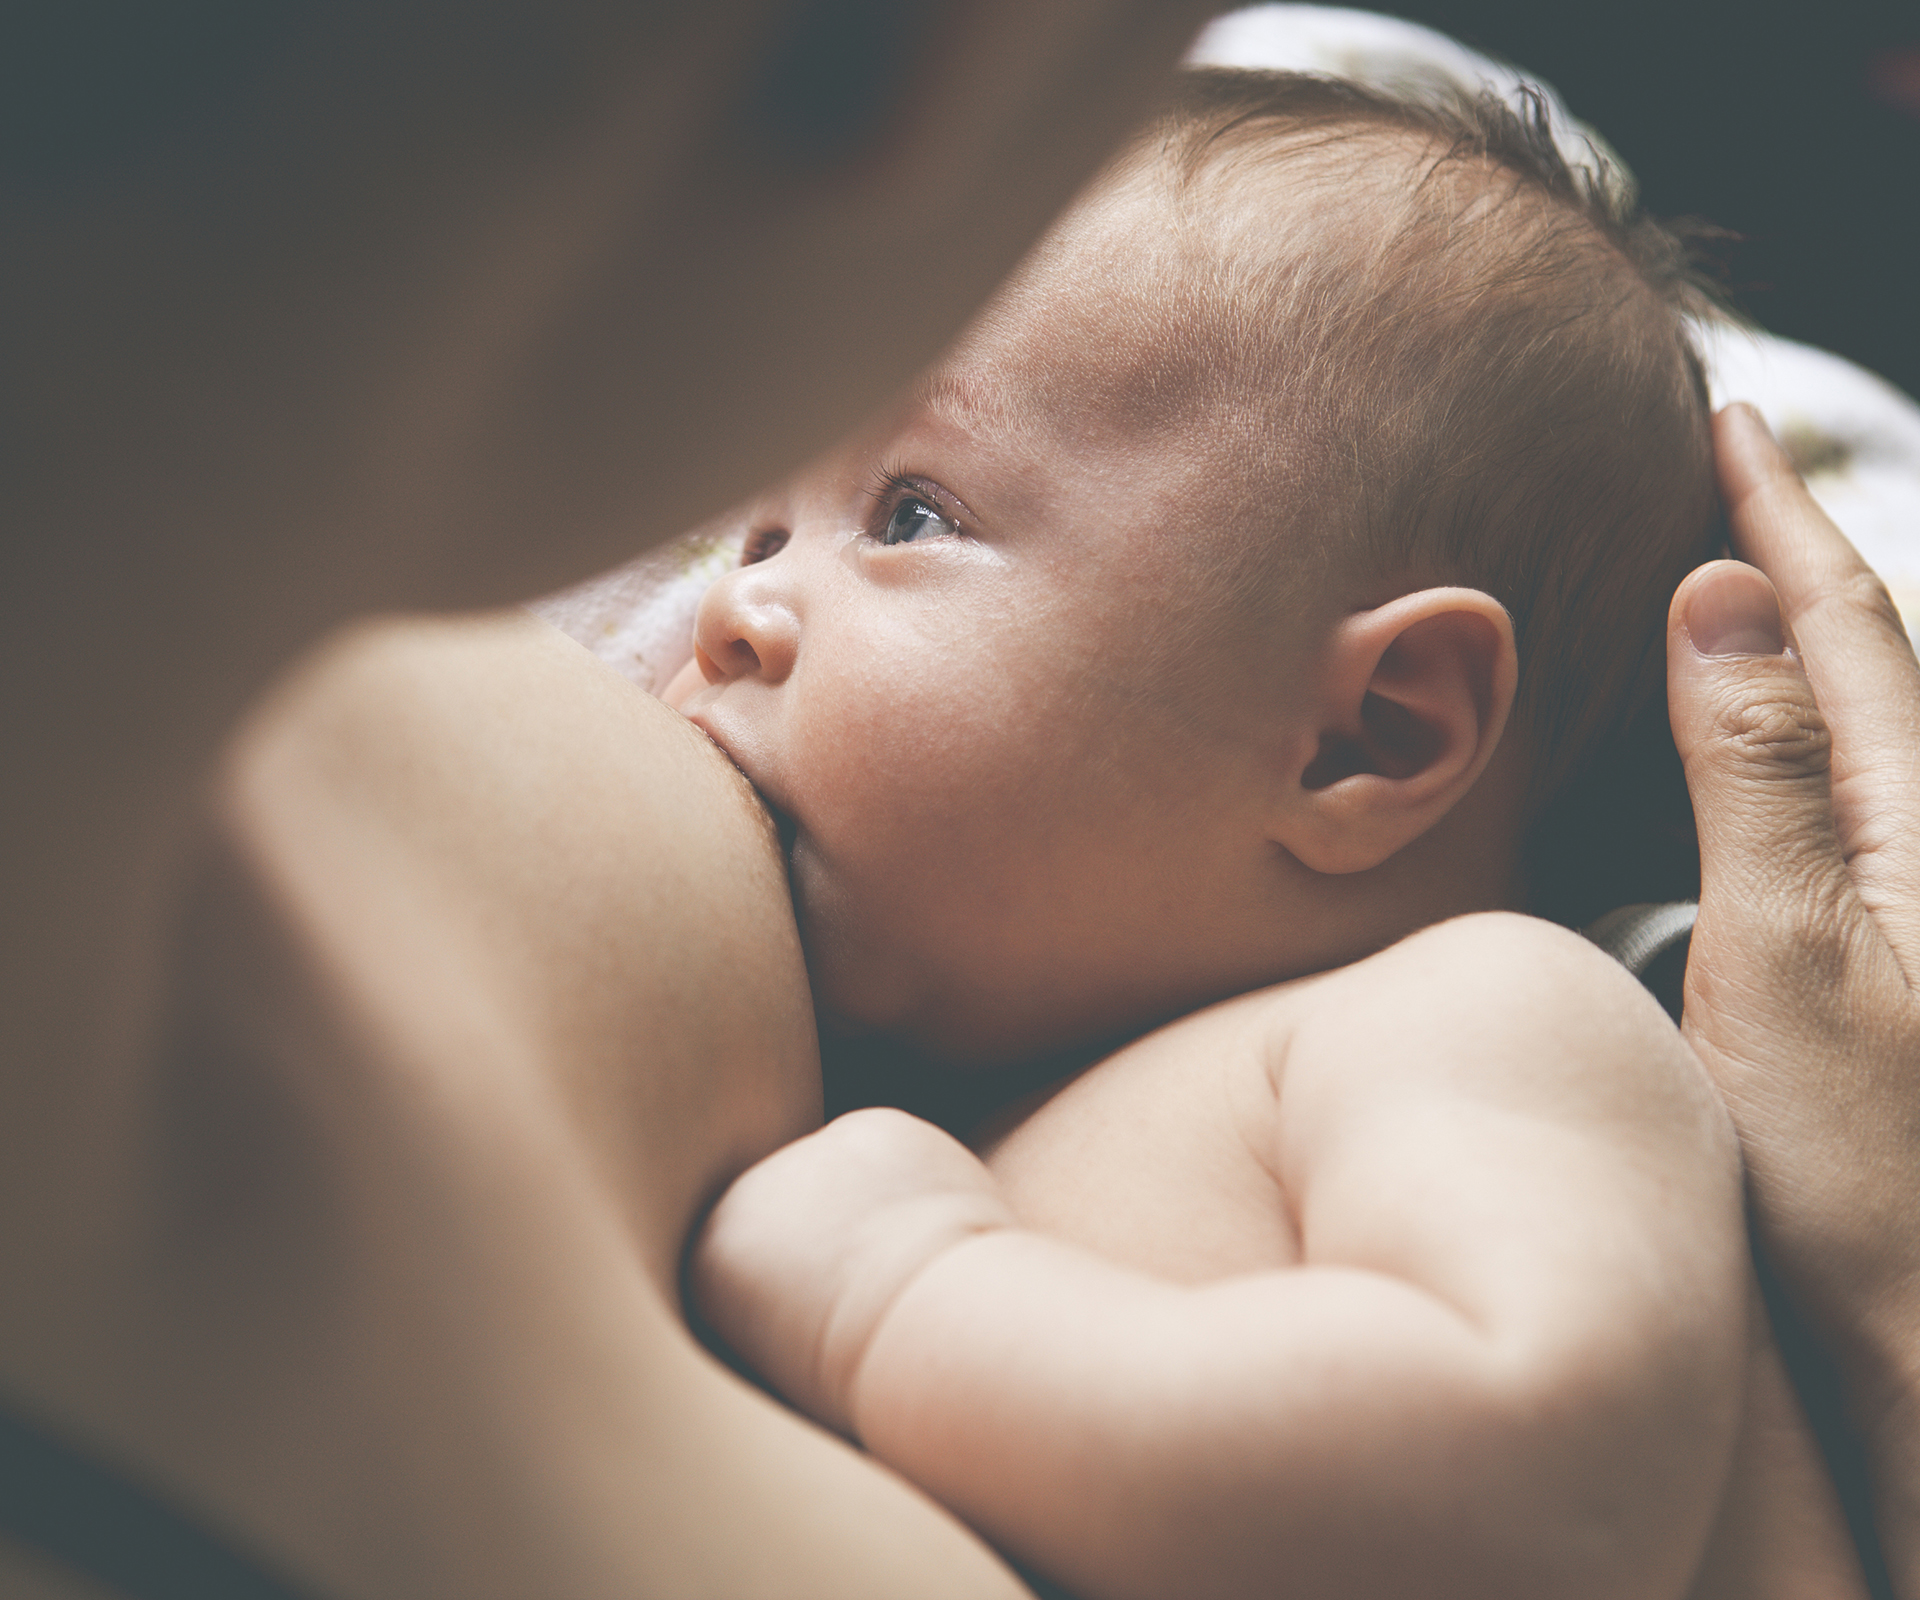 Does the sex of your baby matter when it comes to breast milk?